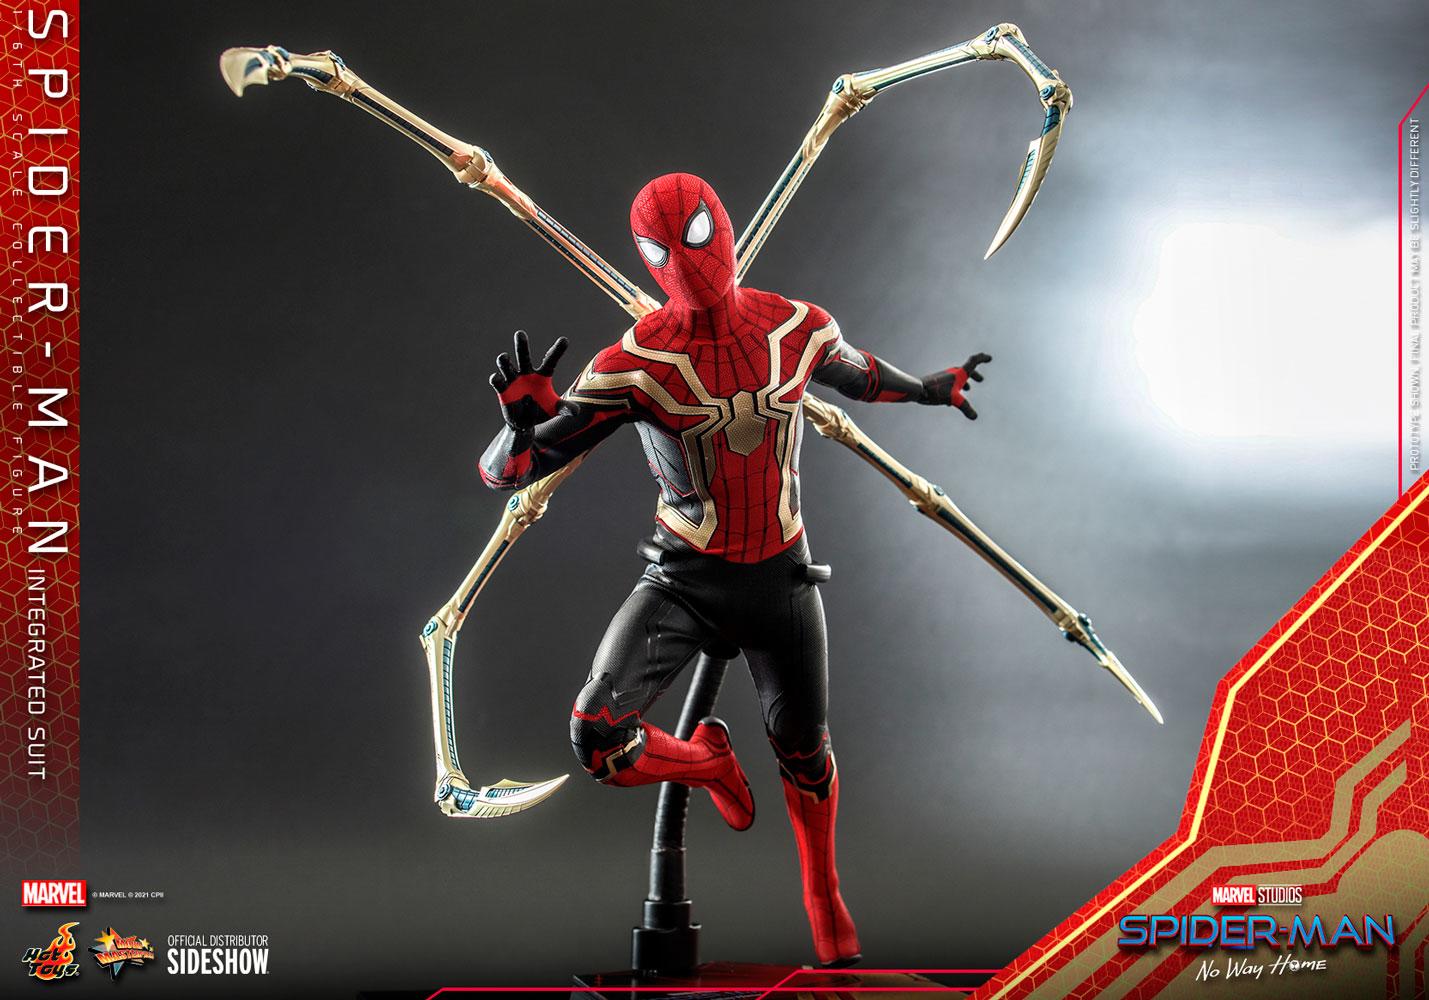 Marvel Spider-Man Titan Hero Series 30-Cm Iron Spider Integration Suit  Action Figure Toy, Inspired by Spider-Man Movie, for Kids Ages 4 and Up